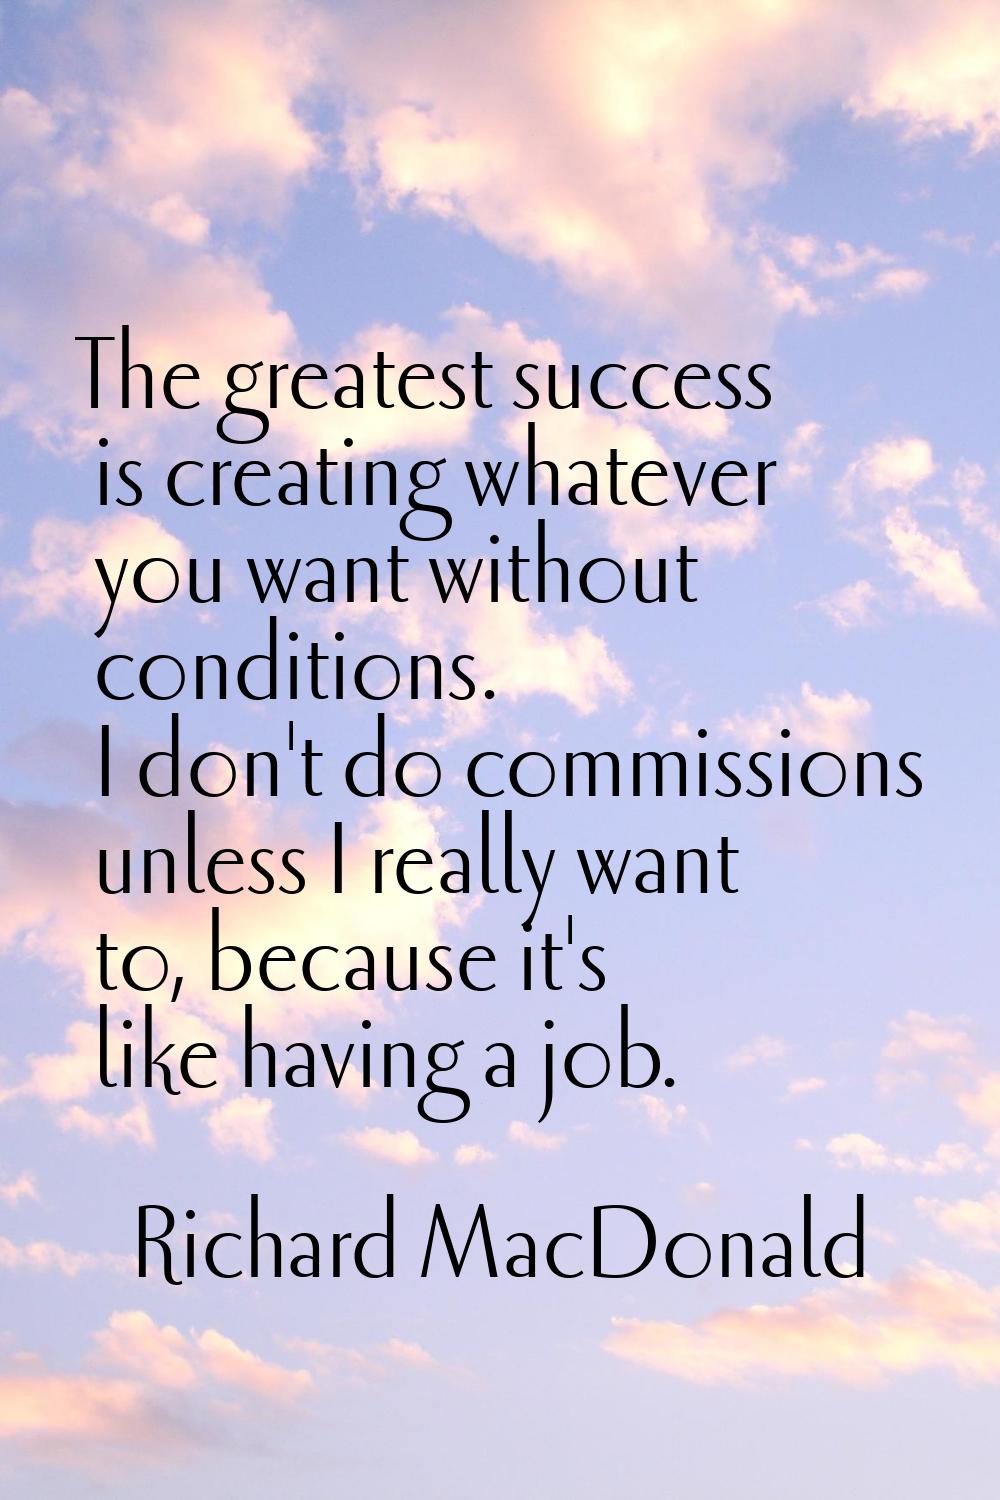 The greatest success is creating whatever you want without conditions. I don't do commissions unles